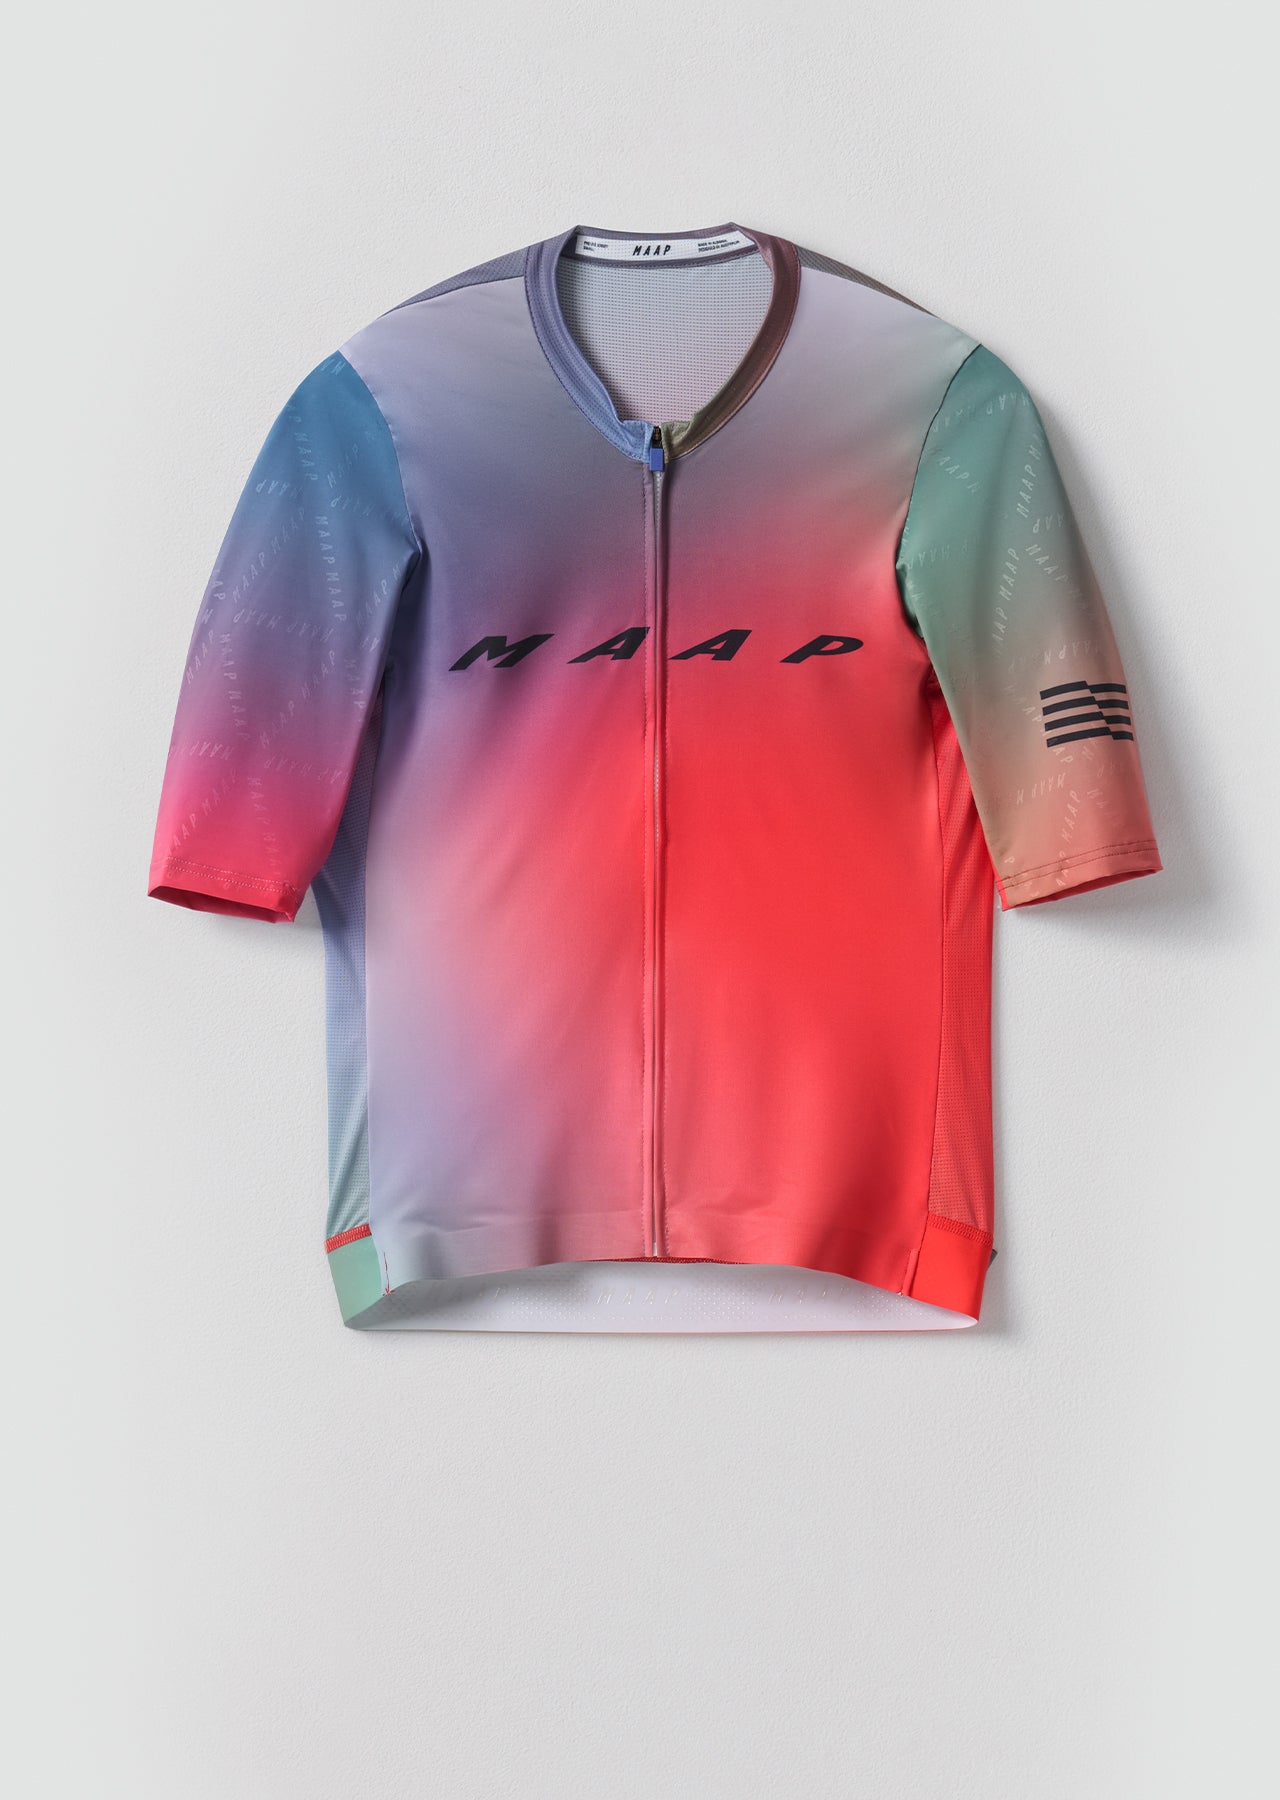 Blurred Out Pro Hex Jersey 2.0 - MAAP Cycling Apparel